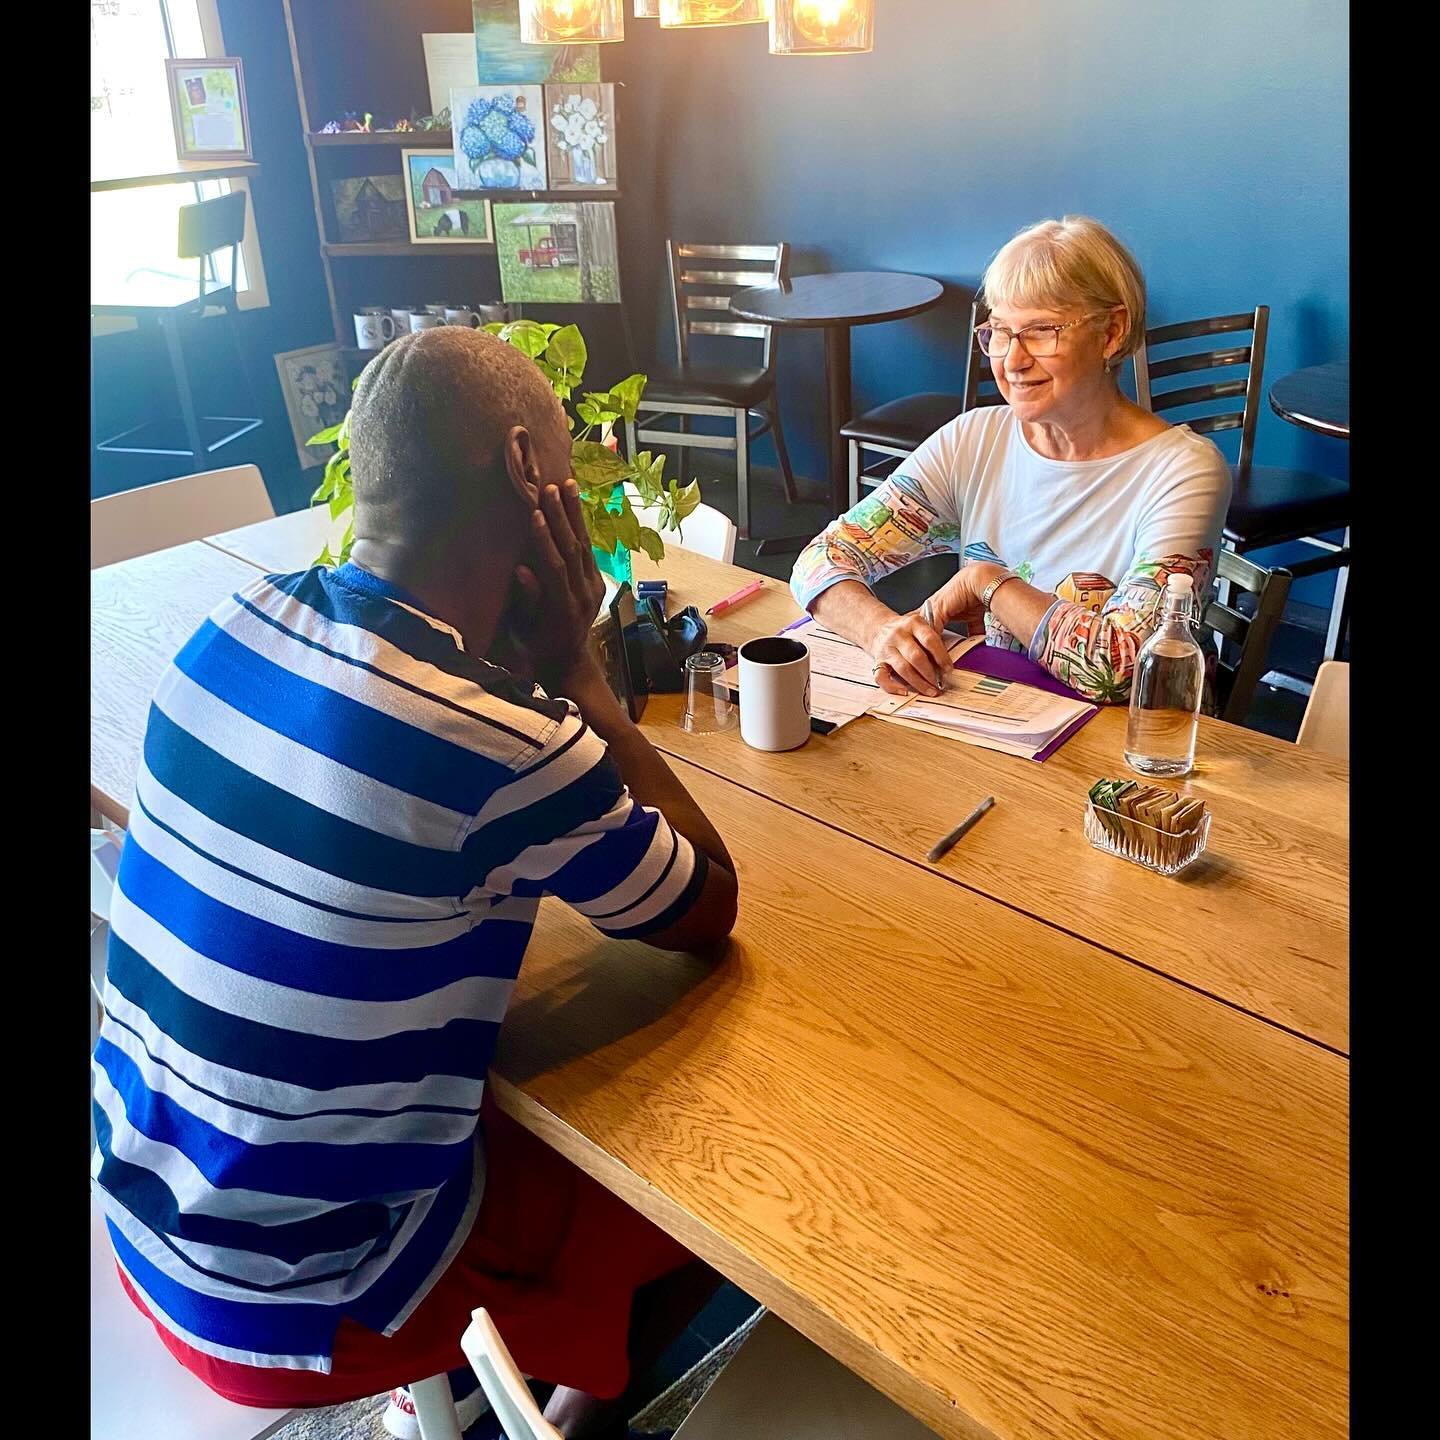 In case you didn&rsquo;t know! We have open interviews every Thursday from 9am-12pm with our lovely Ms. Sharon! Come on into the Dignity Roasters coffee shop for more information and to have an interview! 🤩👍🏻🥳📄 #dignitynotdependency #comeonin #i